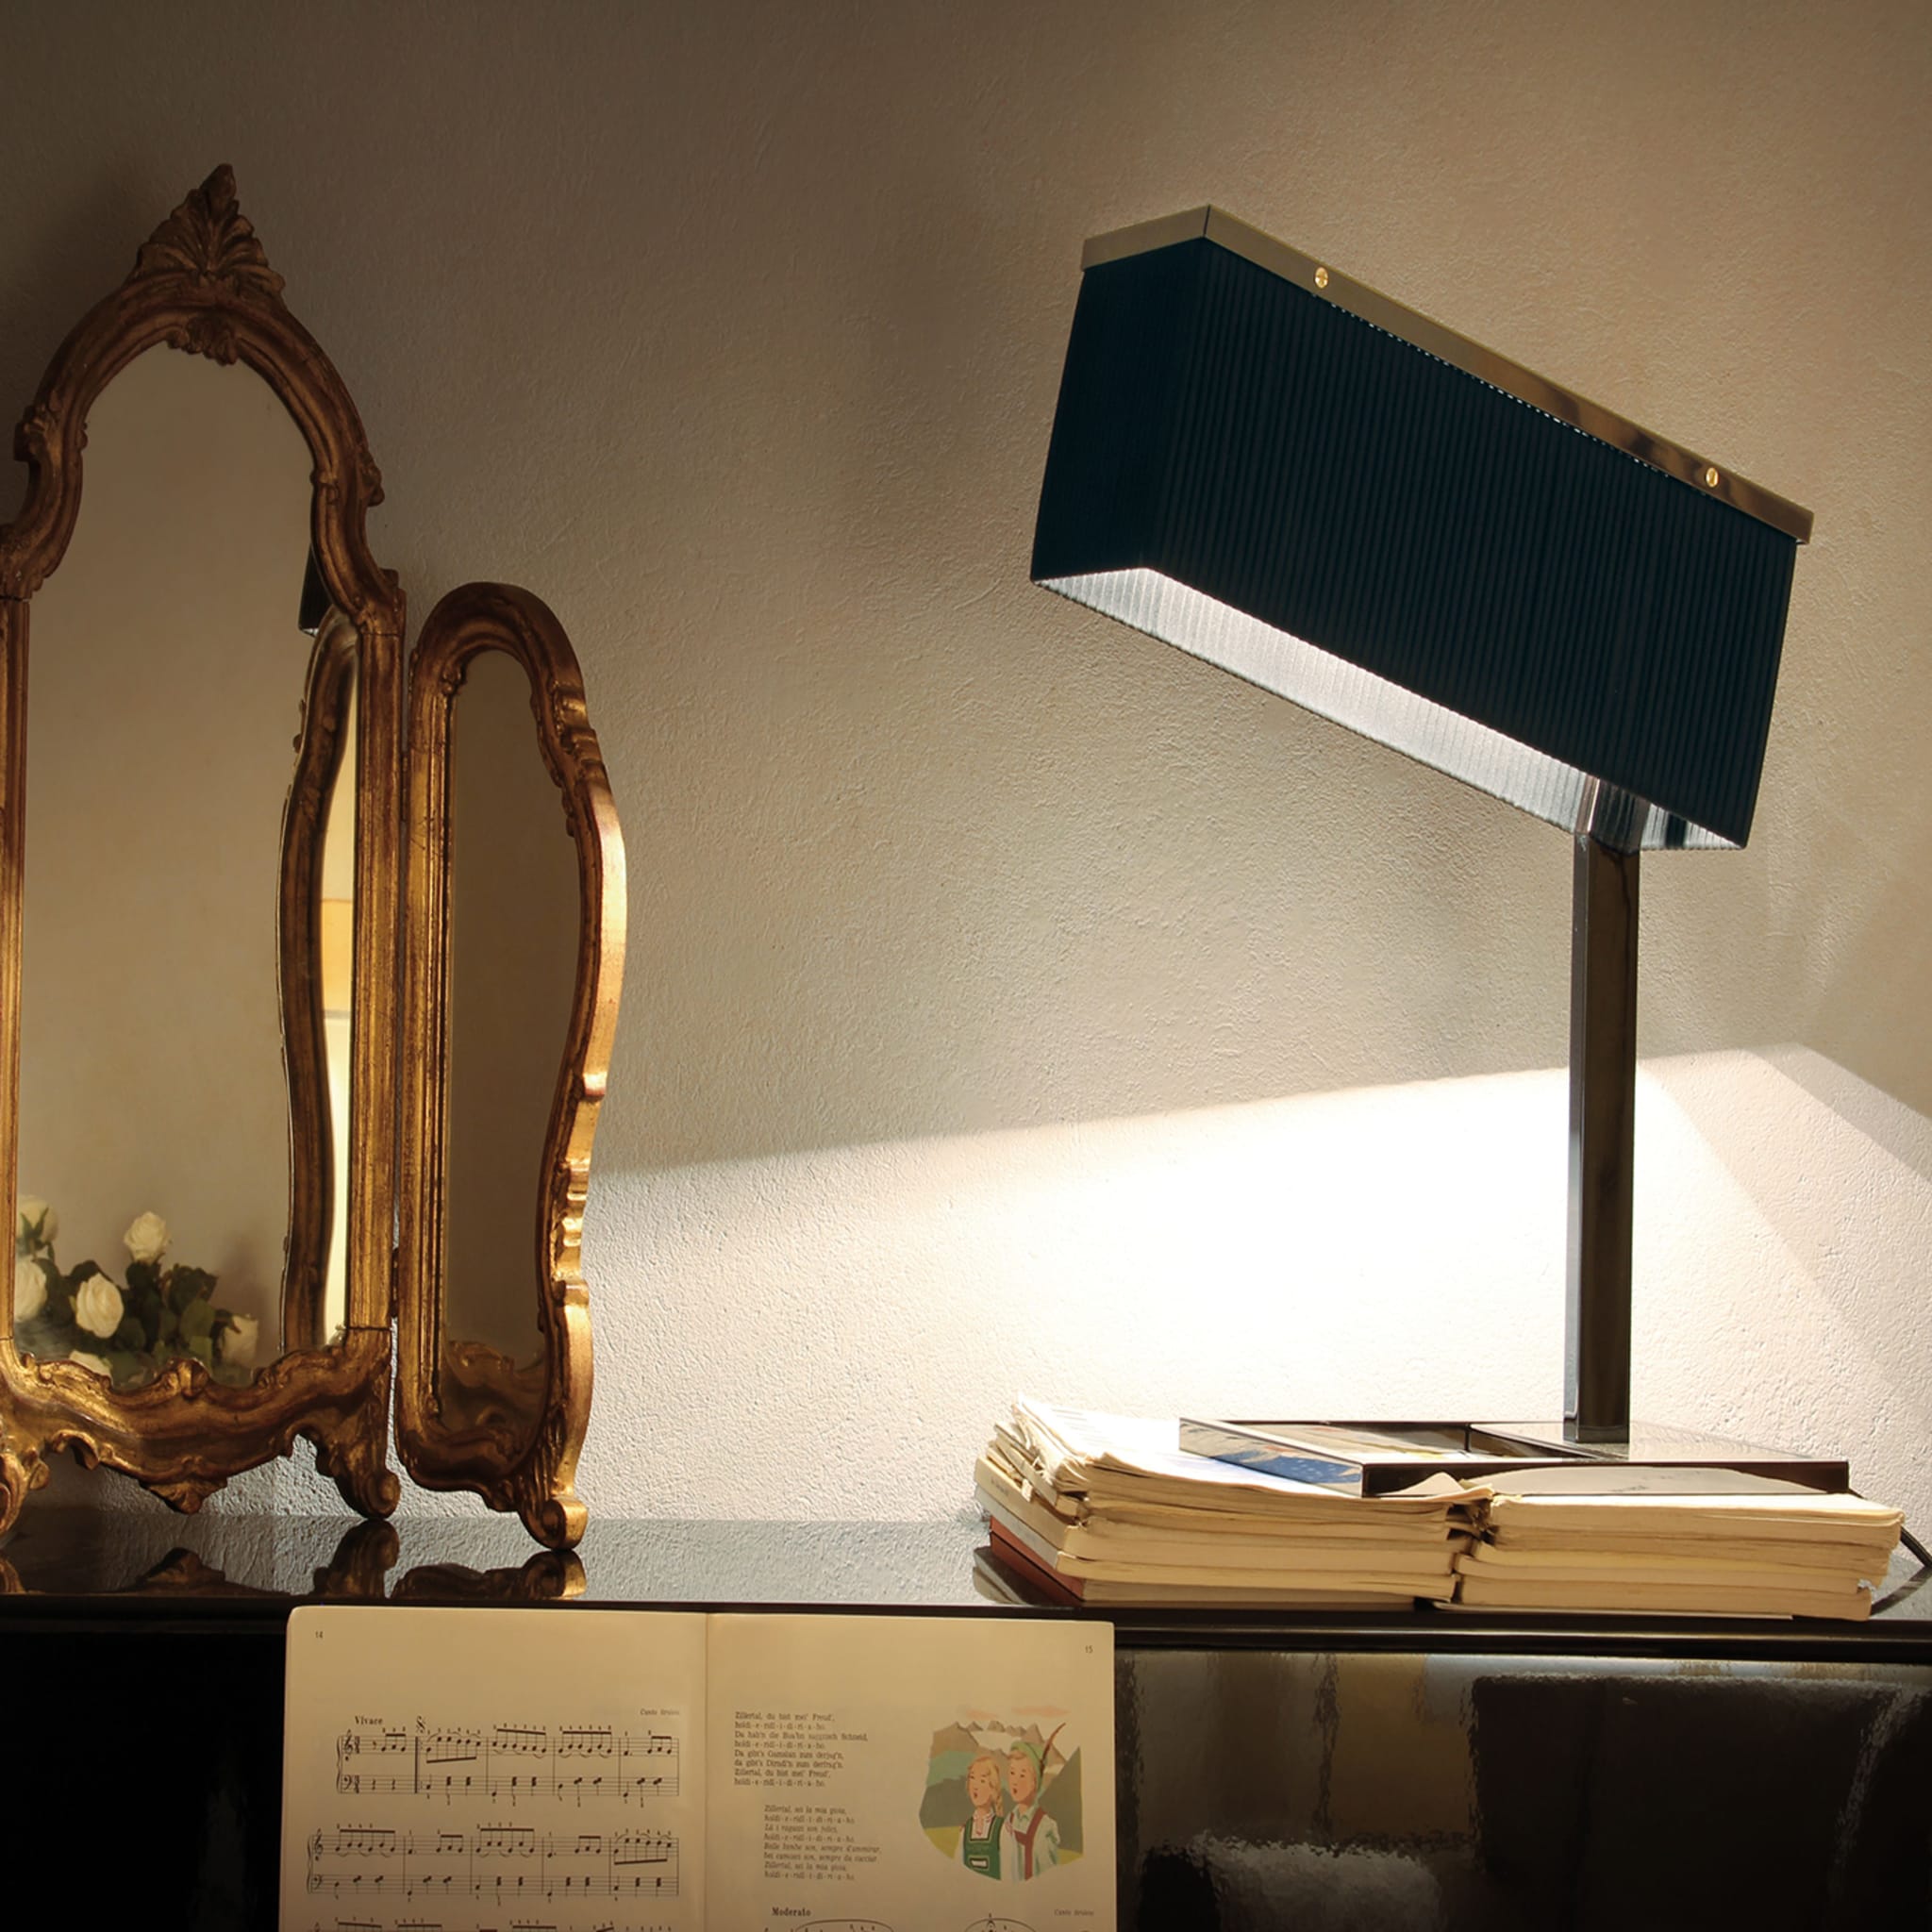 Gimko S Black Table Lamp by Arch. Luca Sgroi - Alternative view 1